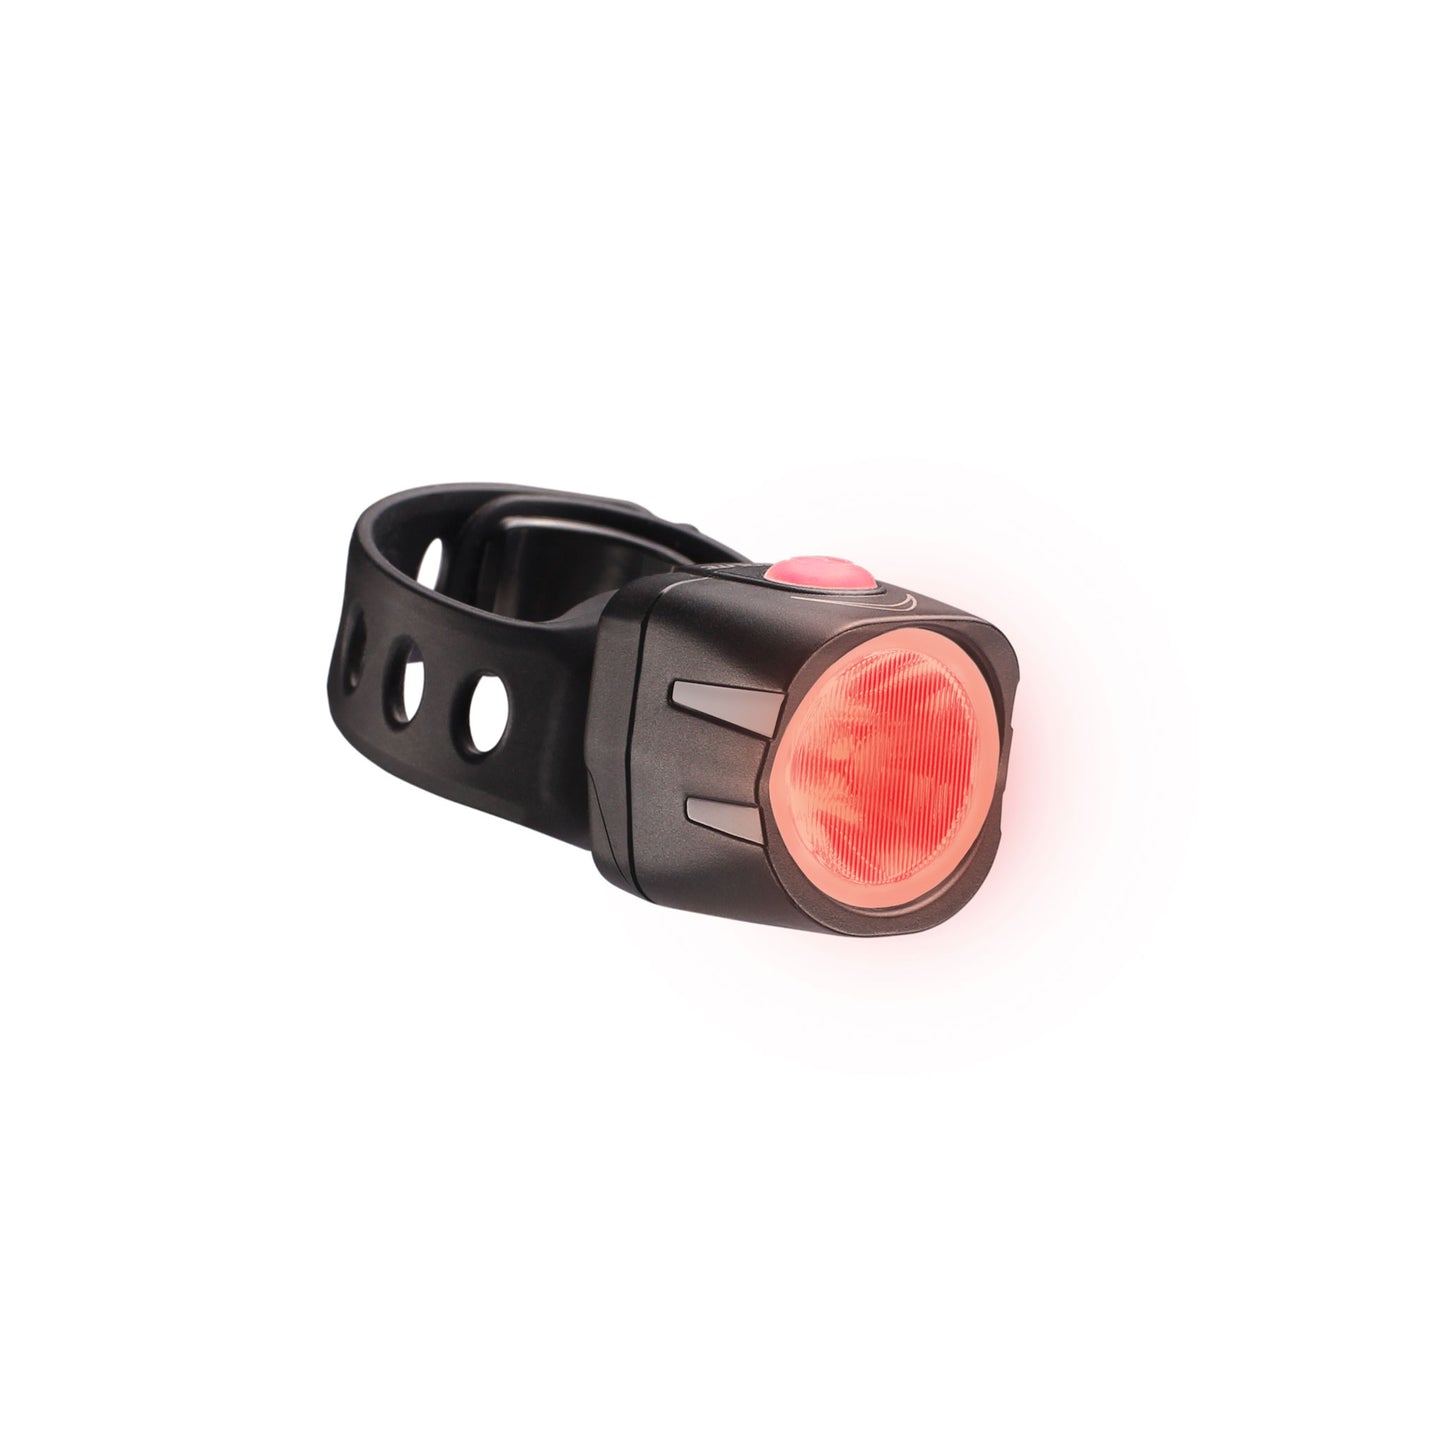 Cygolite Dice TL 50 Rechargeable Taillight - 50 Lumens Strap Mount Black